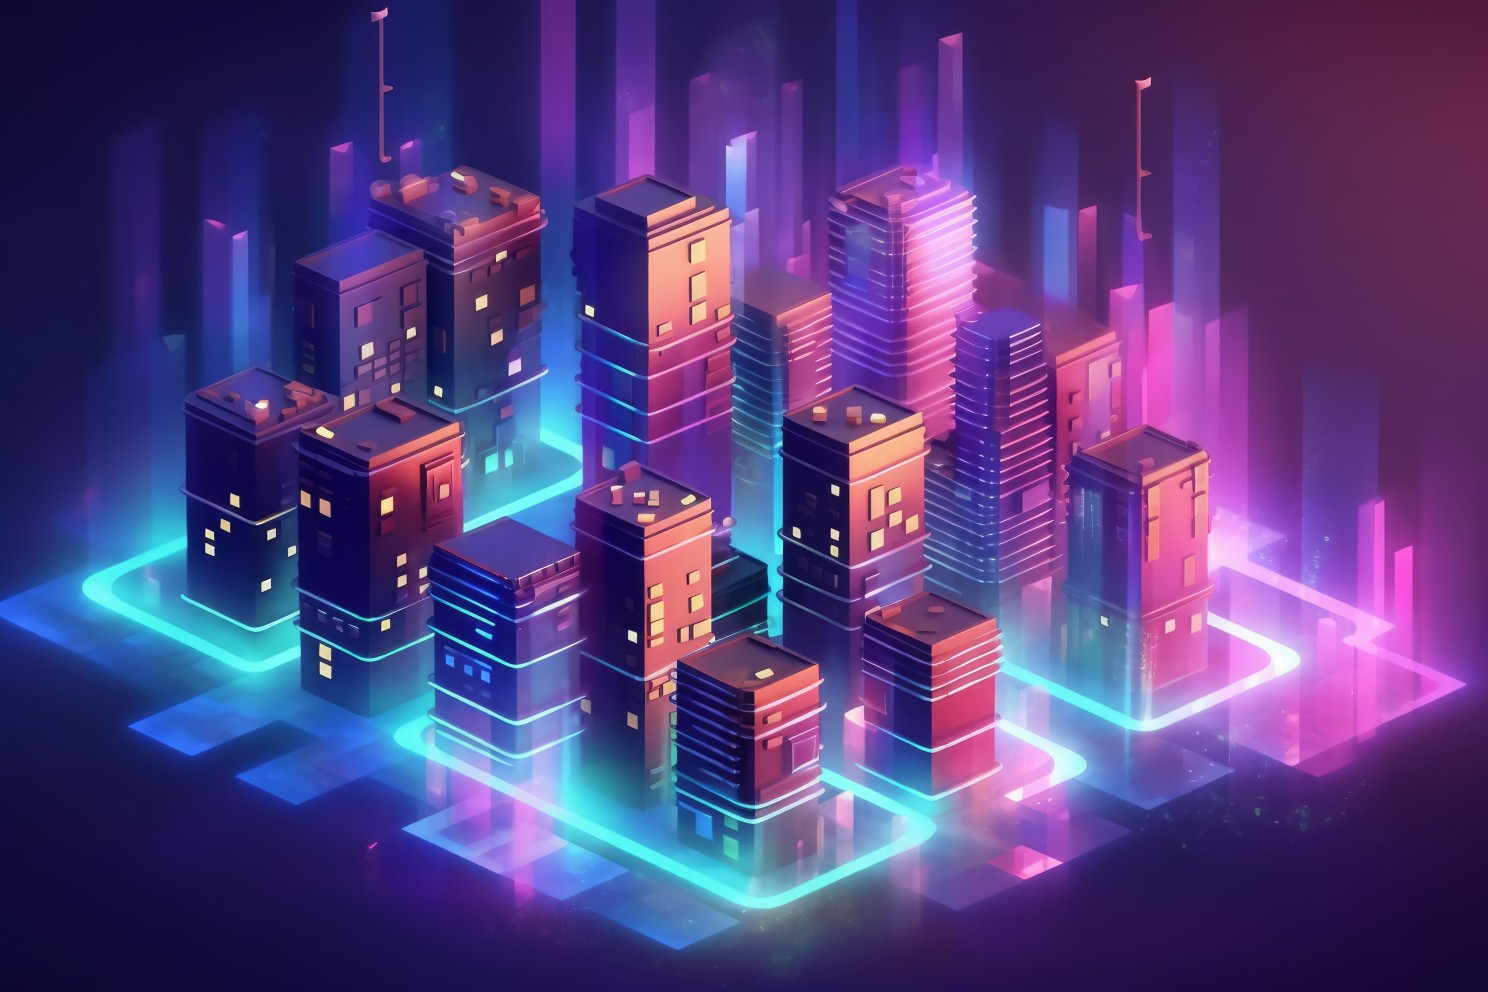 A digital city in isometric view, suspended on glowing platforms in blue and purple gradient colors.